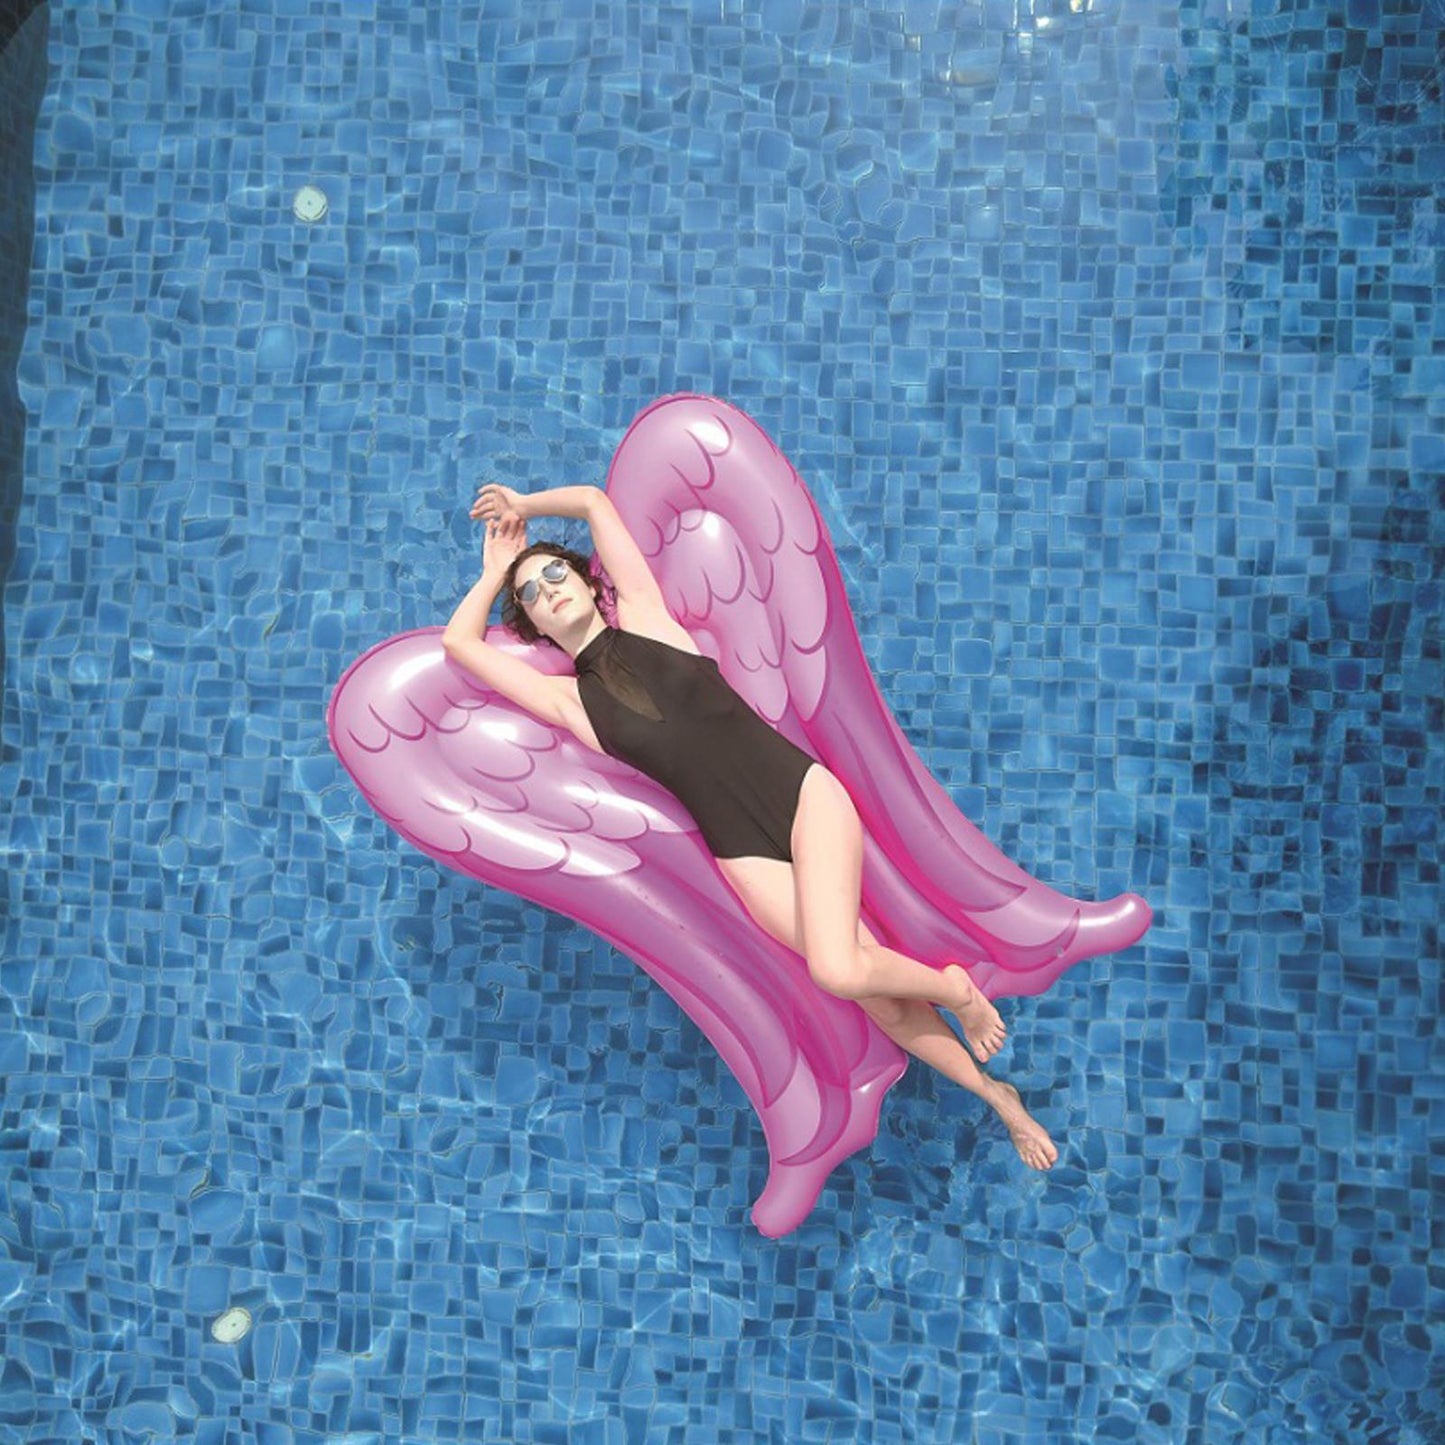 Delightful Angel Wing Pool Float for Swimming Fun